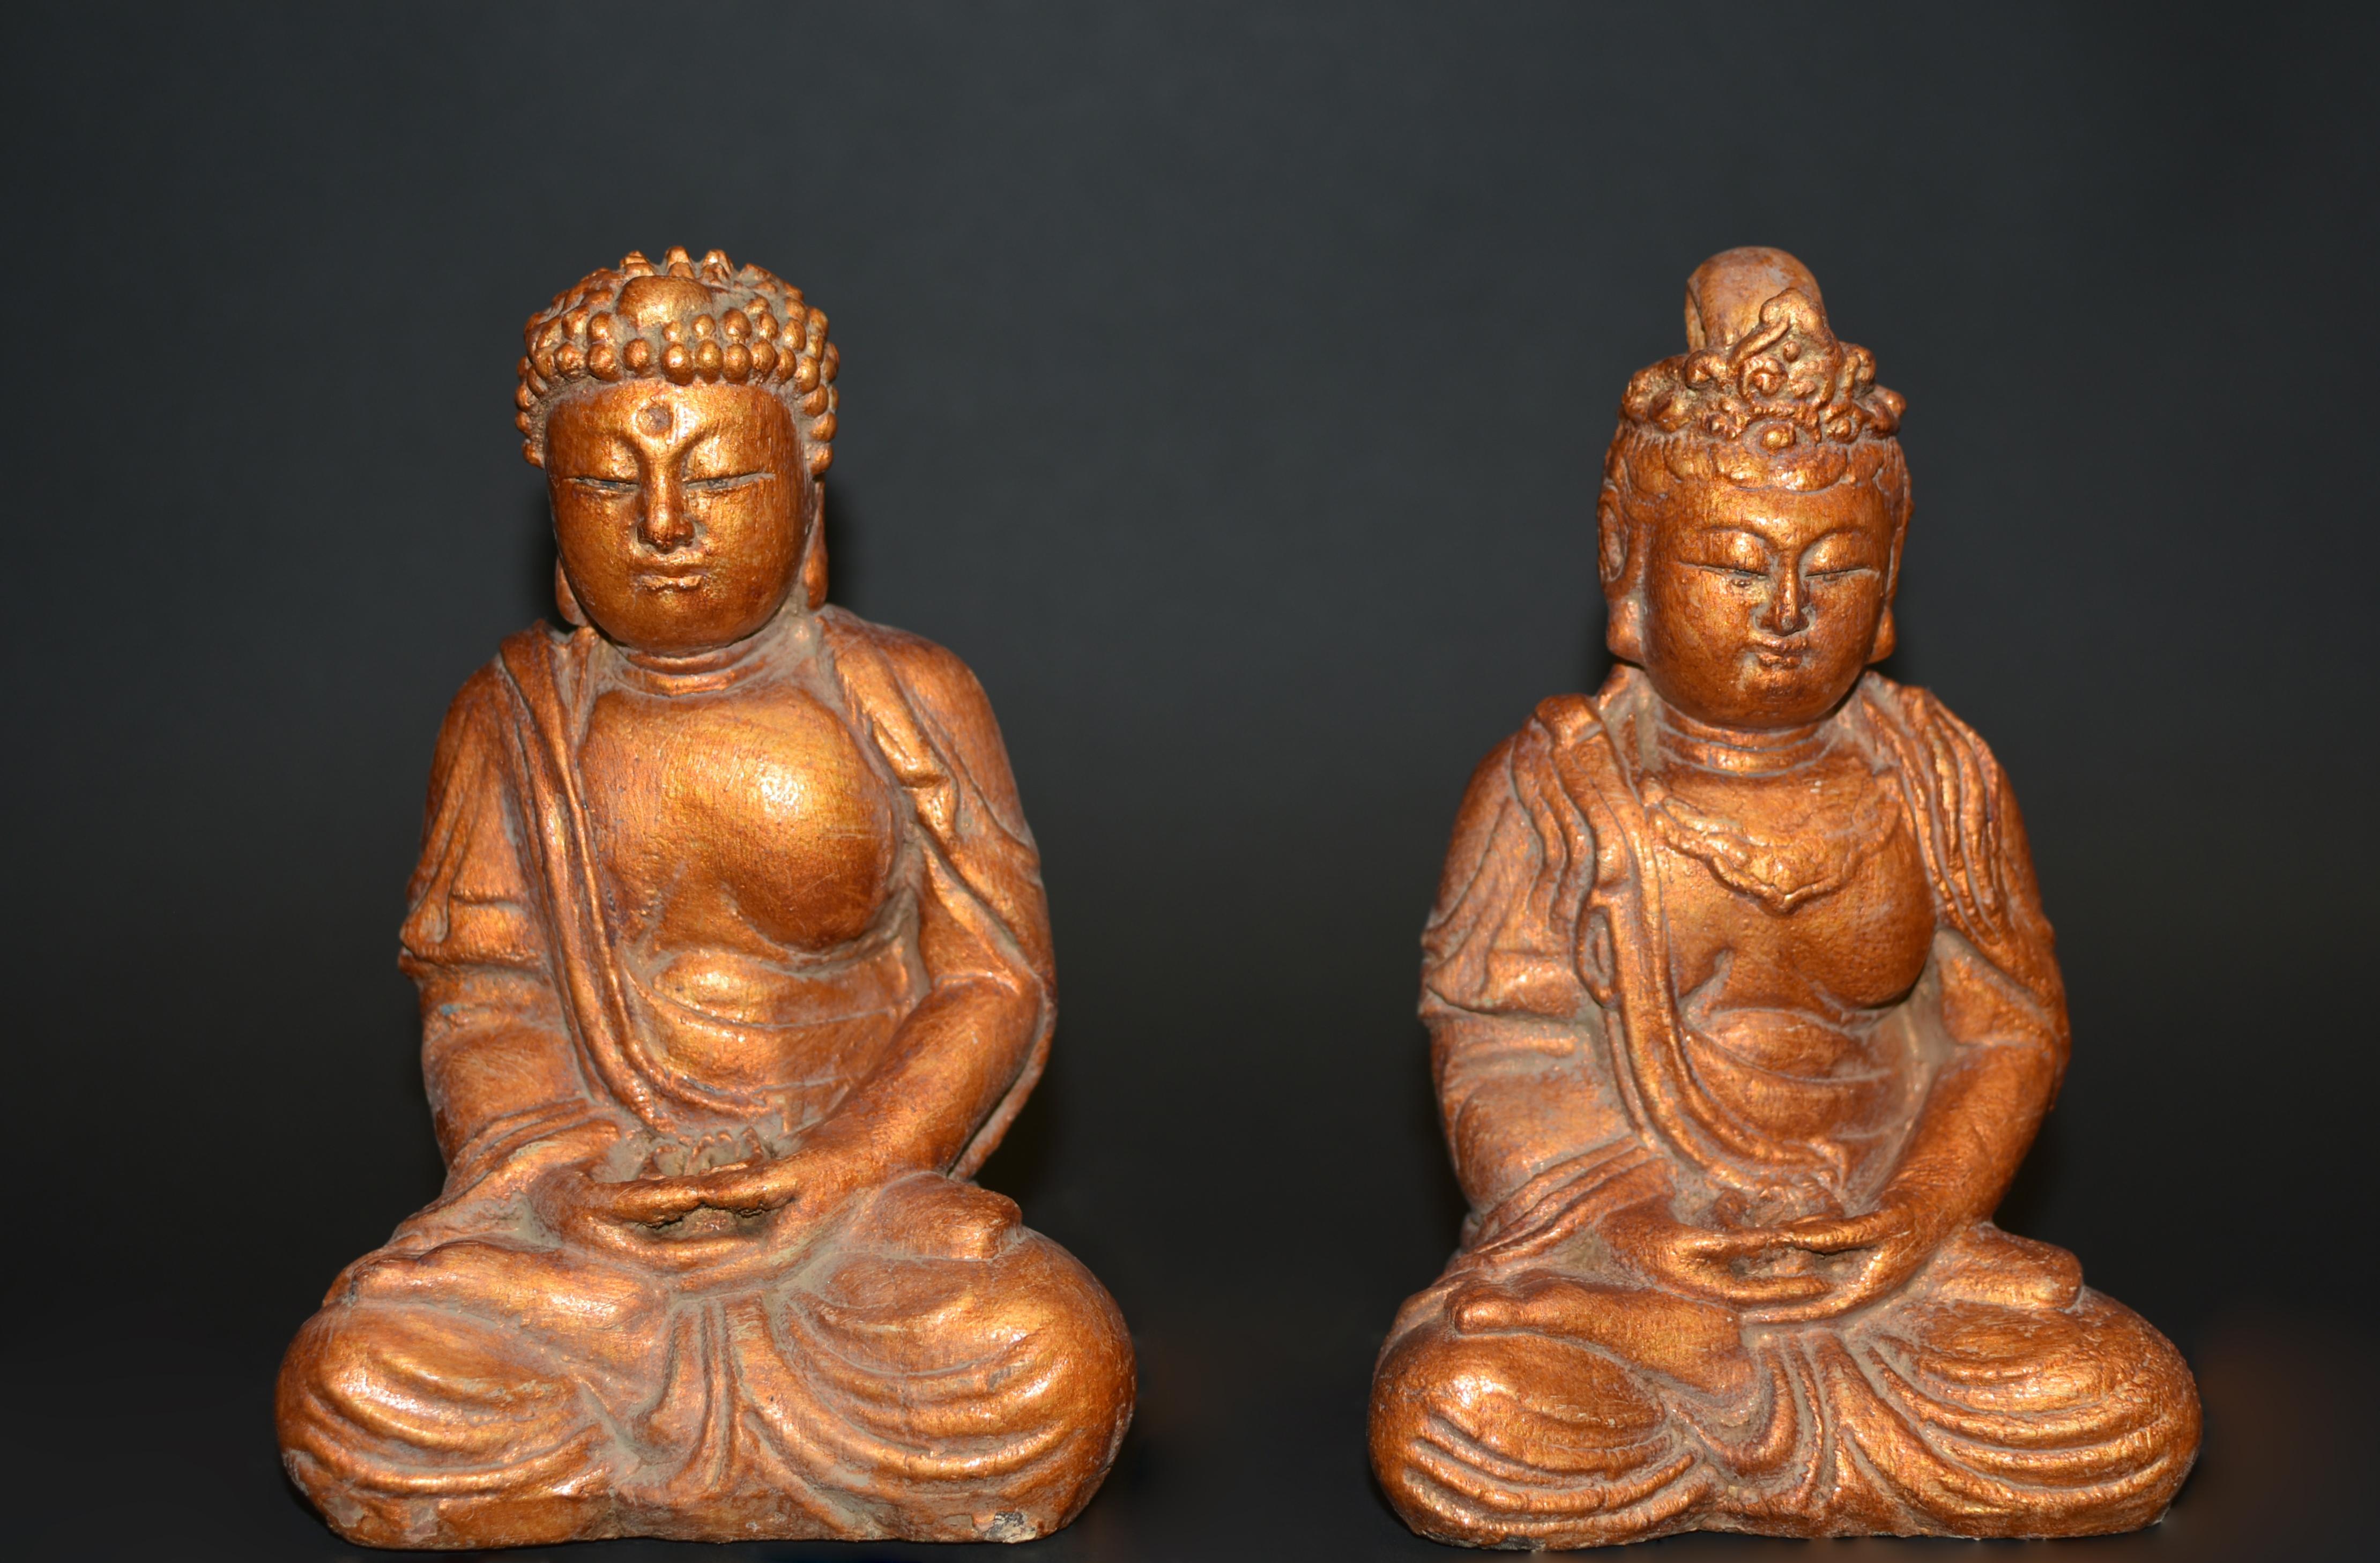 A rare offering of two vintage paper mache statues of Amitabha Buddha and Guanyin Avalokiteshvara. Seated dhyana asana with hands in dhyana mudra, both have Tang style full faces with downcast eyes above pursed lips flanked by long earlobes, wearing